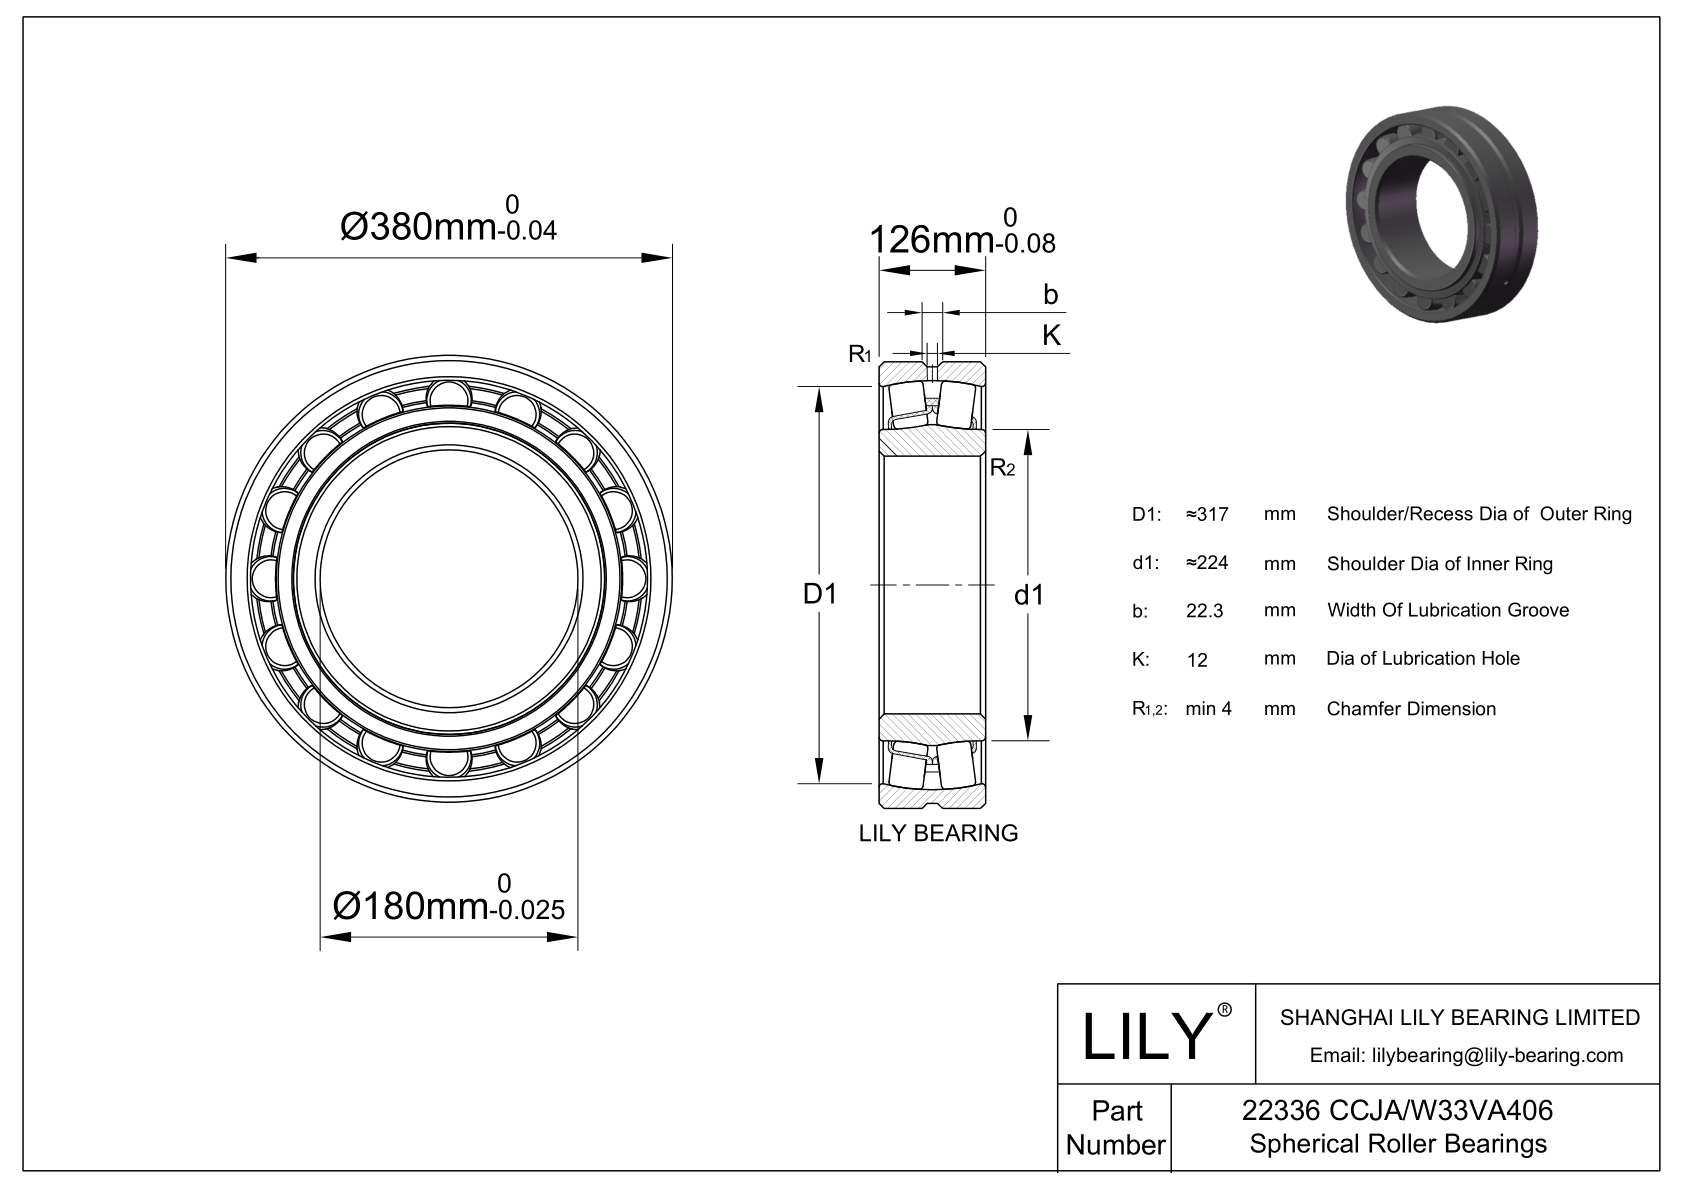 22336 CCJA/W33VA406 Double Row Spherical Roller Bearing cad drawing